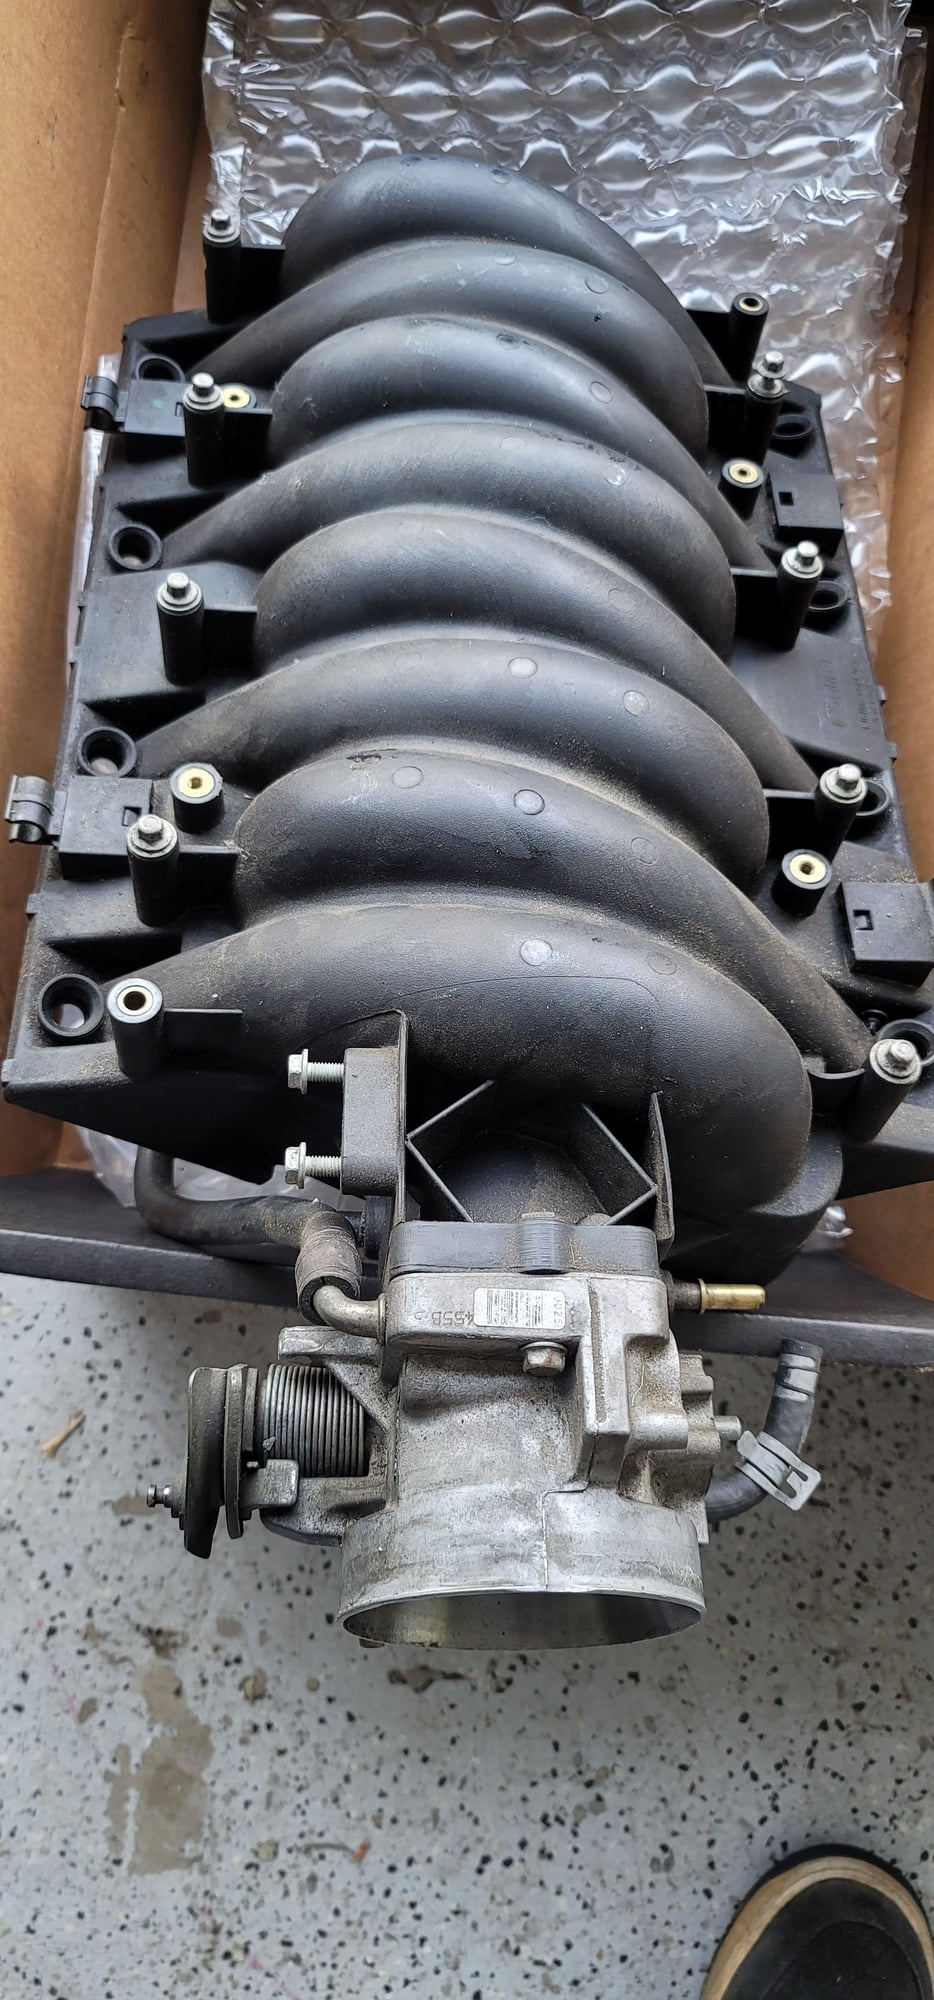 Engine - Intake/Fuel - LS6 intake manifold c/w Throttle body, Fuel Injectors without Fuel rail - Used - Clermont, FL 34711, United States